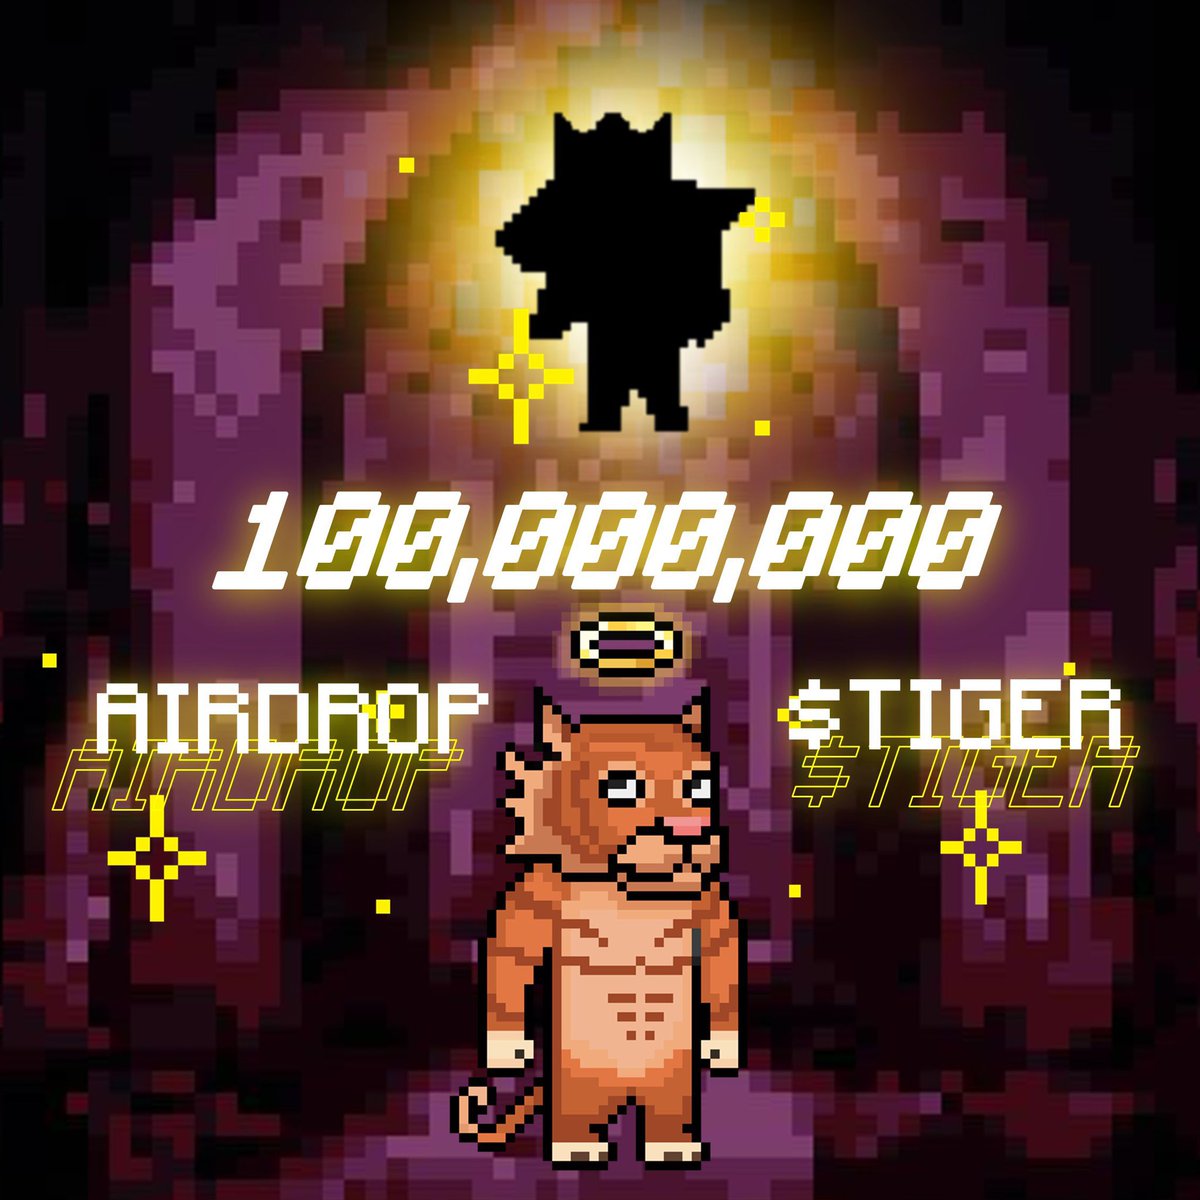 LEGENDARY AIRDROP OF 100,000,000 $TIGER 🚀 $TIGER is the first meme token on #TON with a utility. The coin will become the main game resource in the future game from Pixel God, and you can mine it right now. t.me/tiger_drop_bot… It’s not too late start farming!